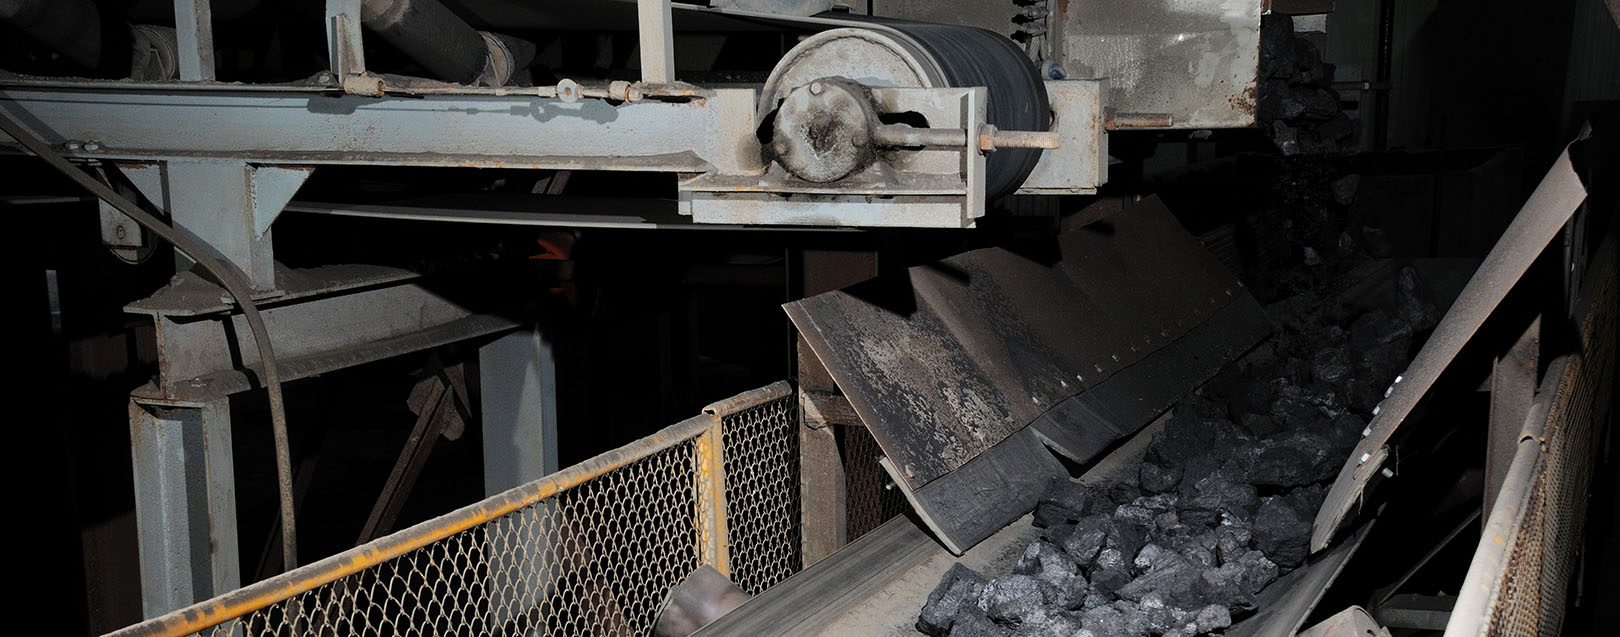 No auction of coal mines in the next 2-3 months